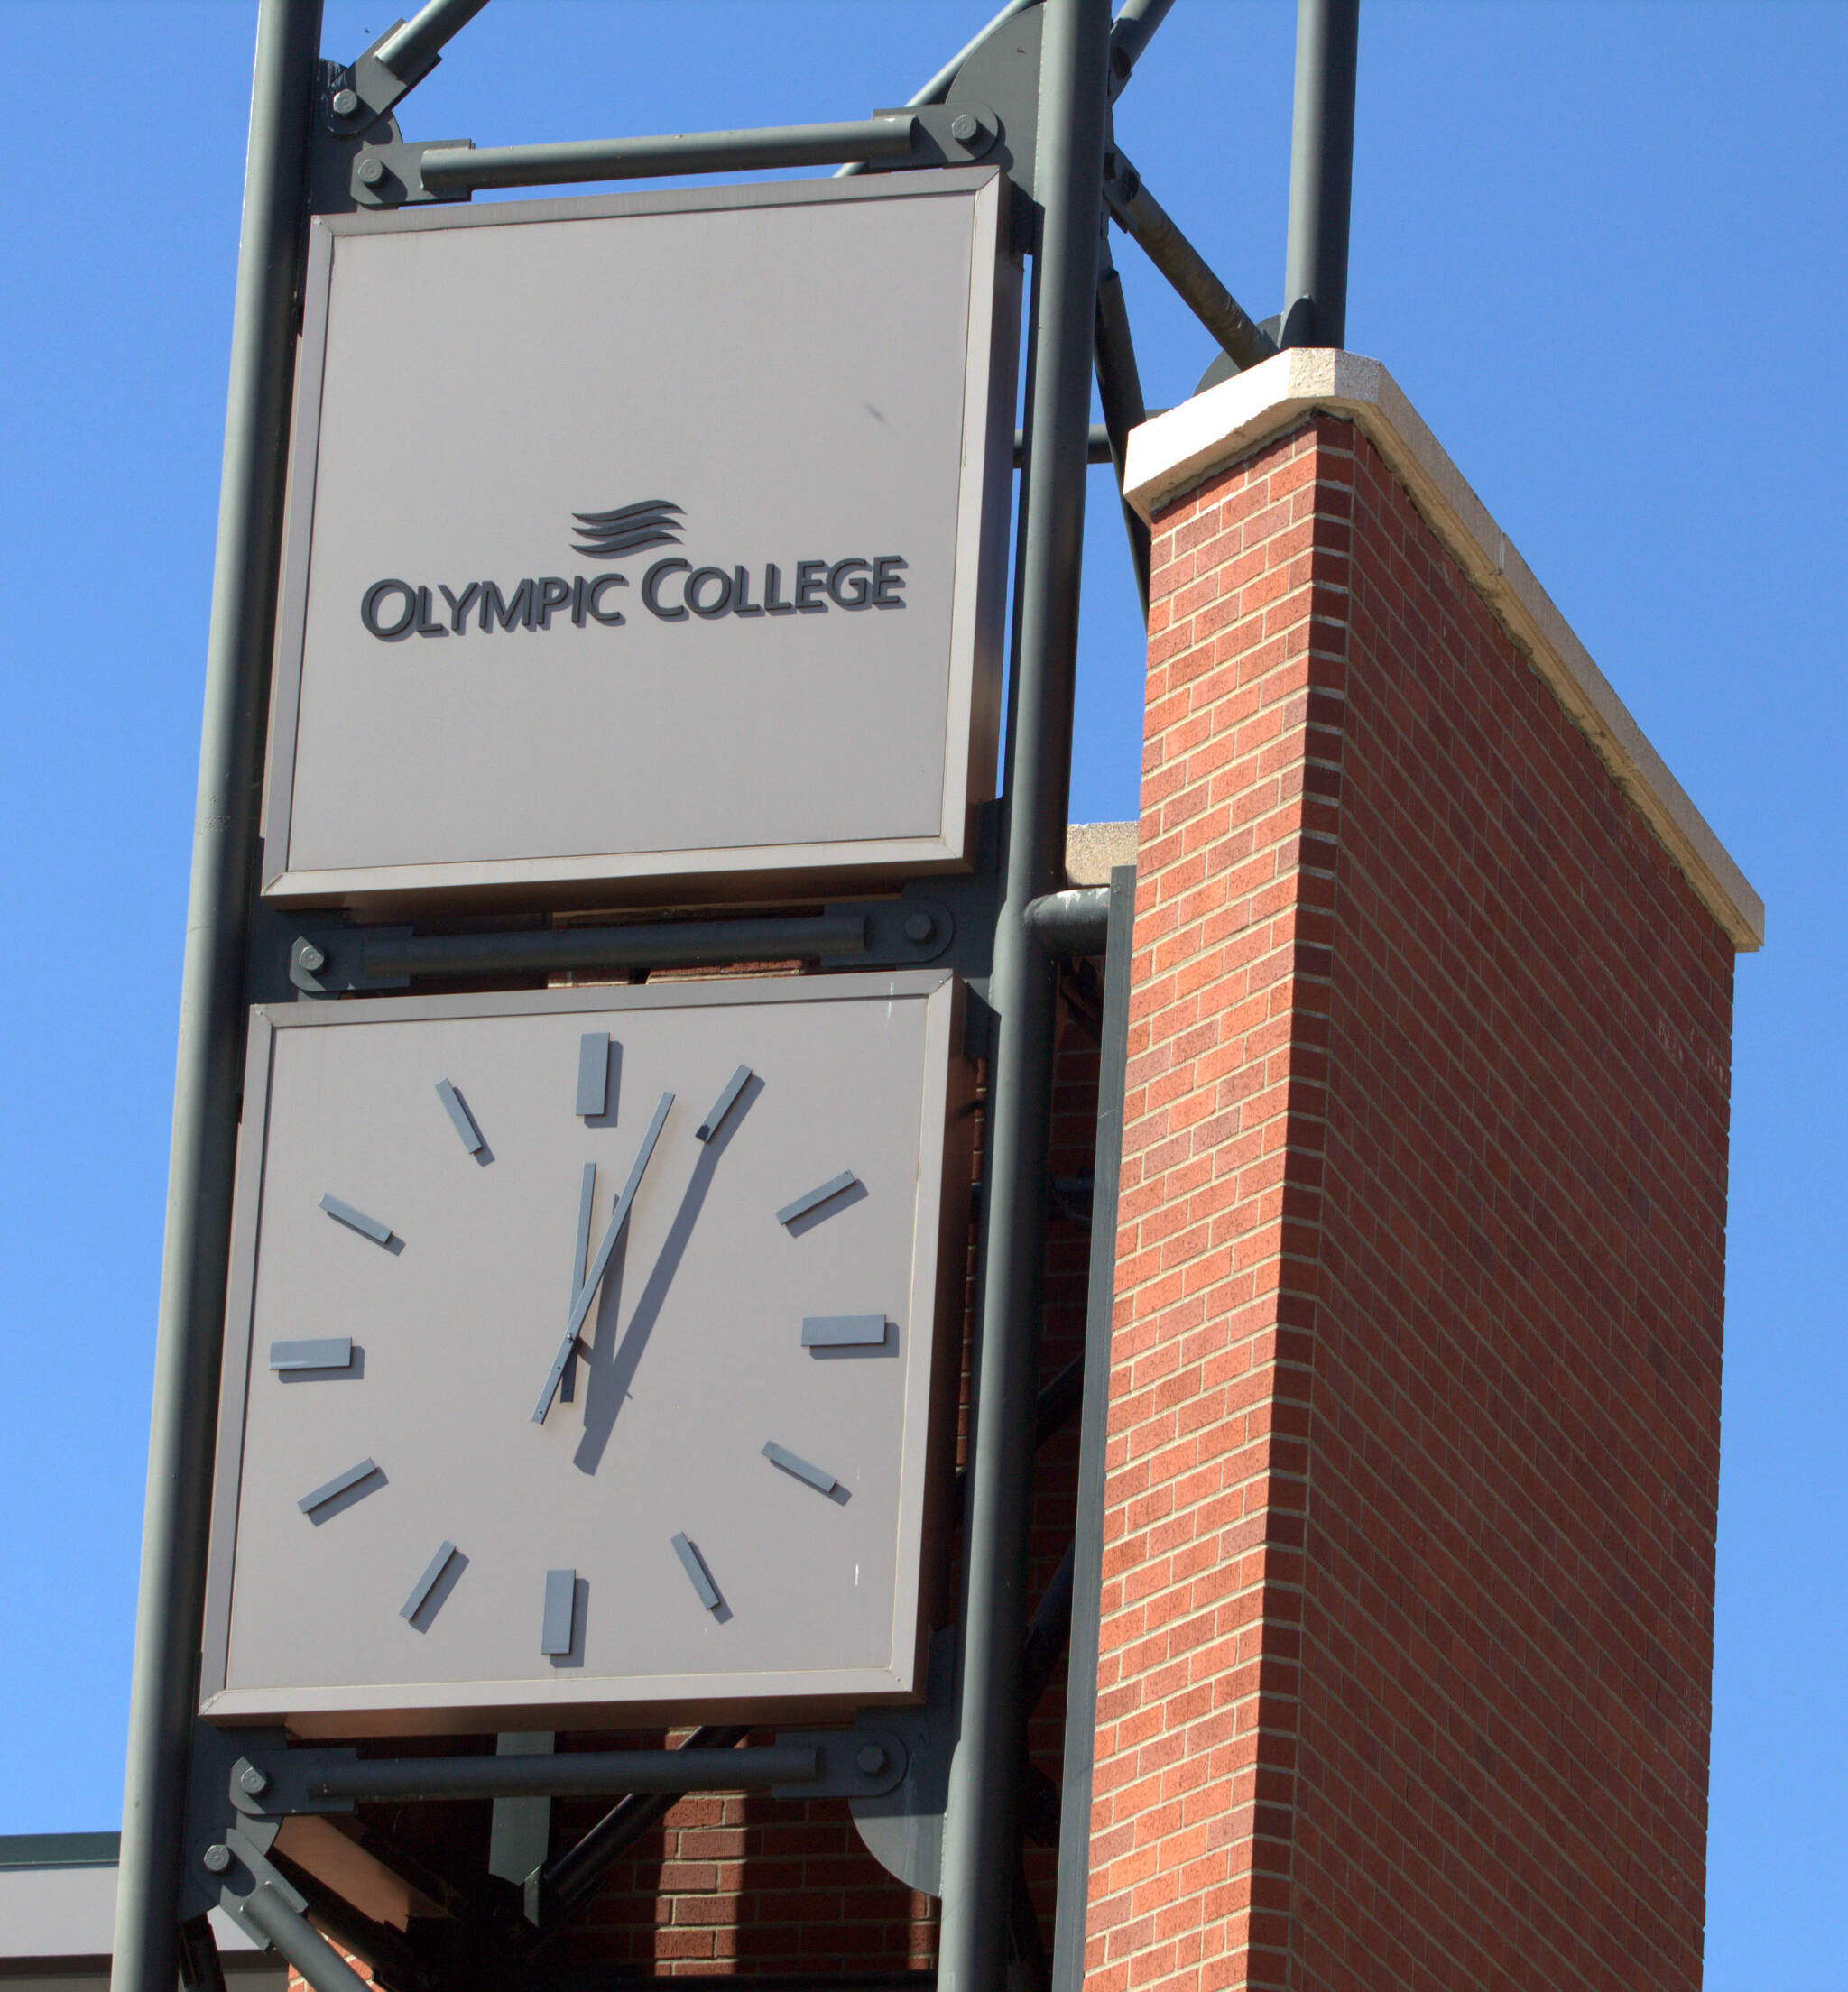 The Olympic College clock tower.